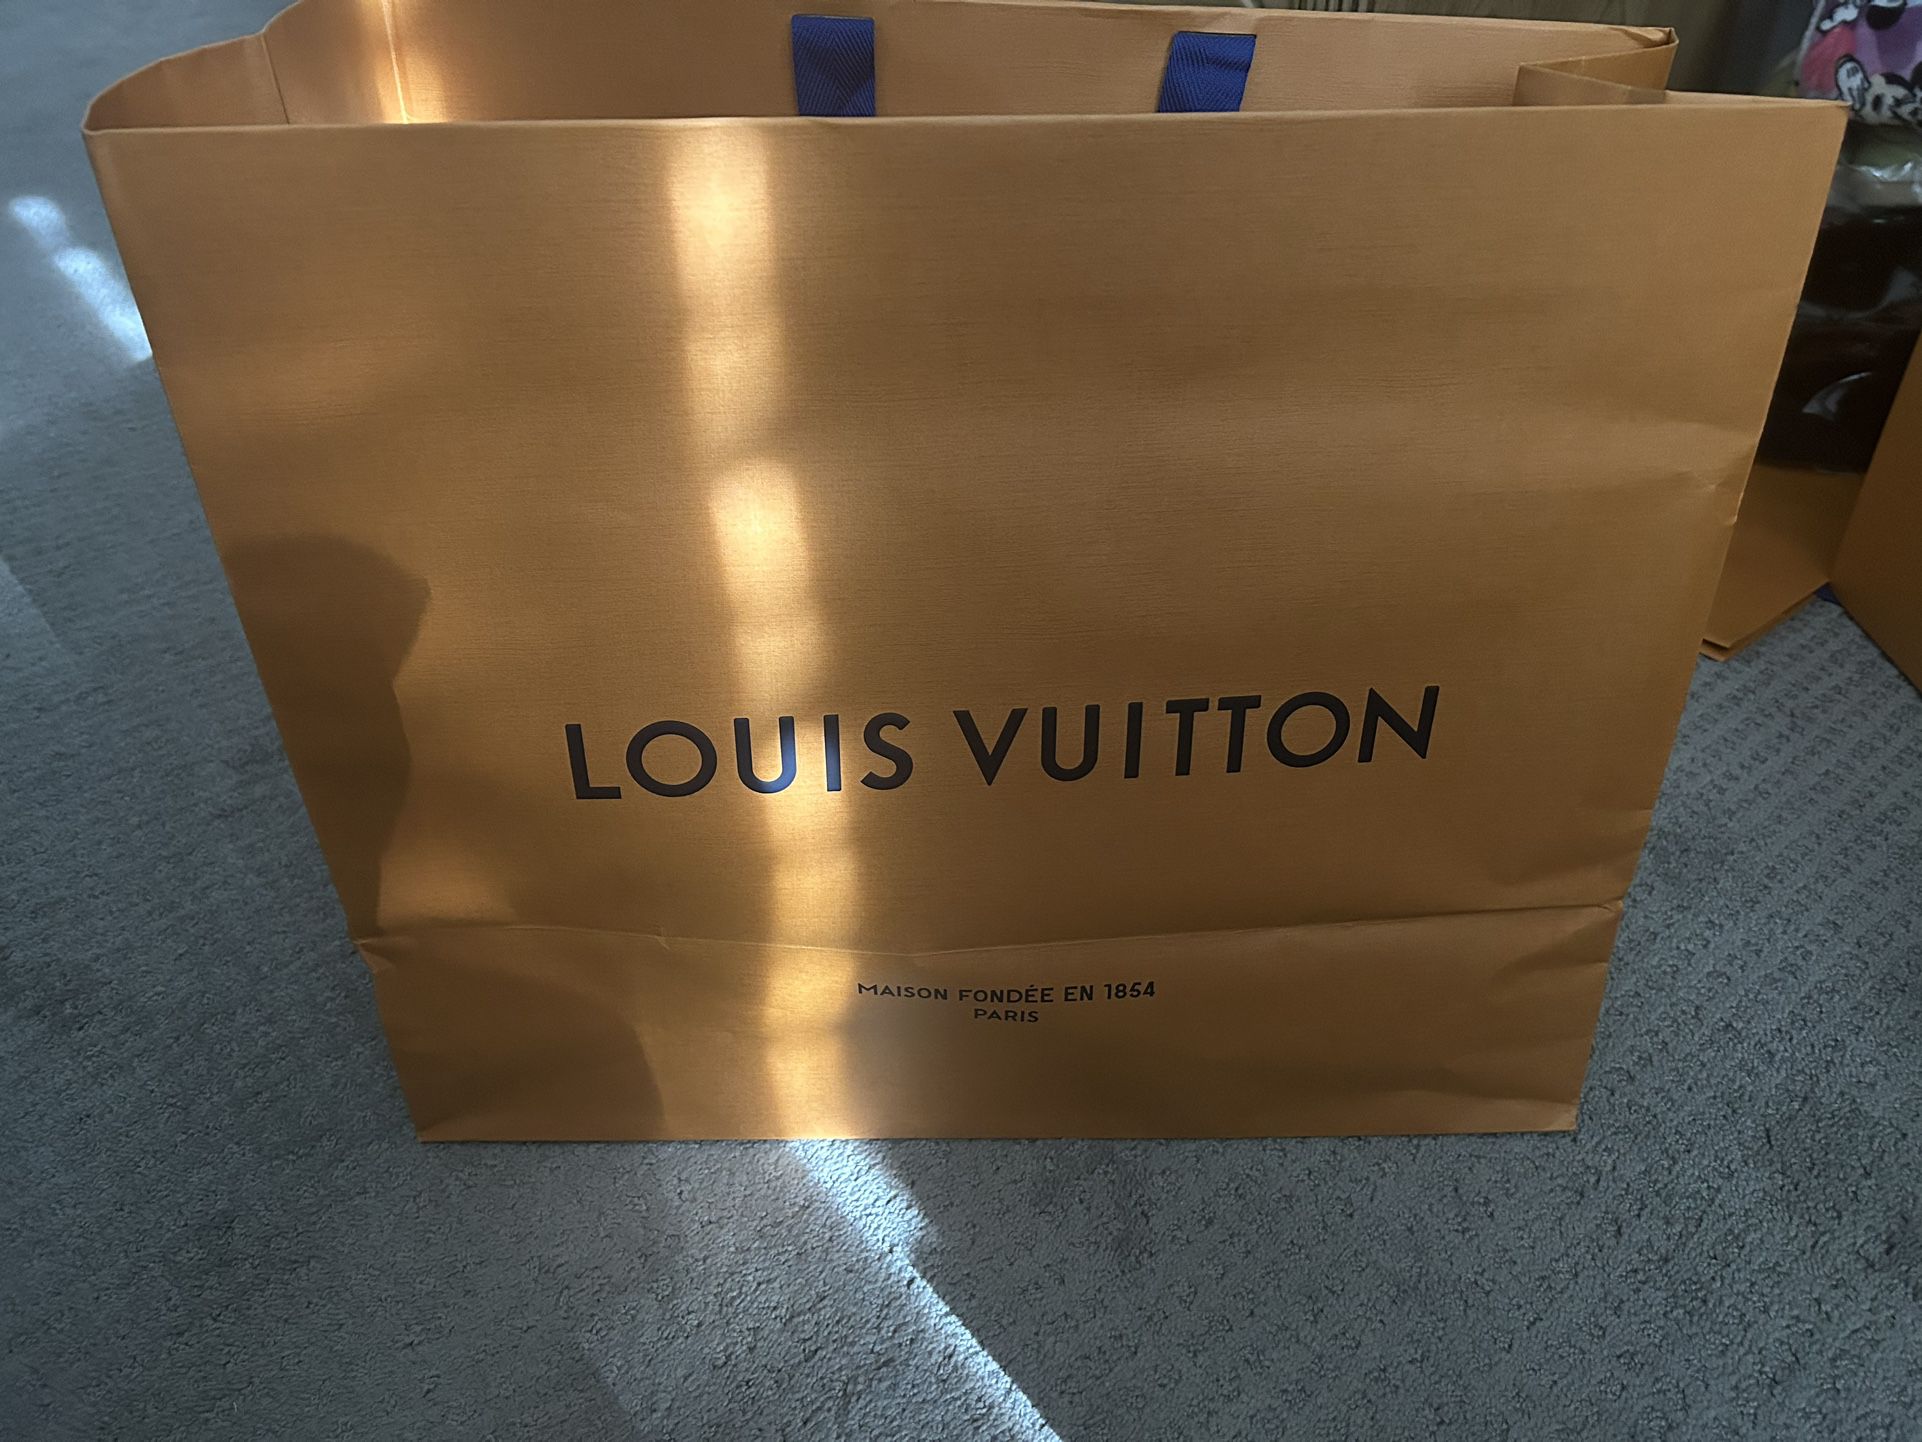 Authentic Louis Vuitton Boxes And Bags 